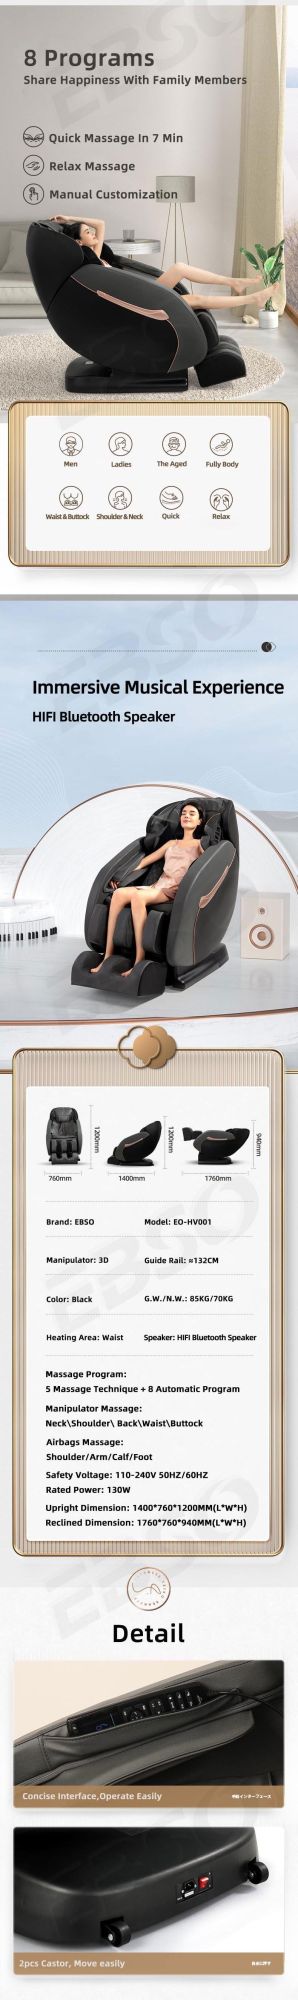 Ksm-Mc1 Brown Zero Gravity Human Touch Stretch 4D Latest Electronic Massage Chair for Wheelchair People Body Massager Chair